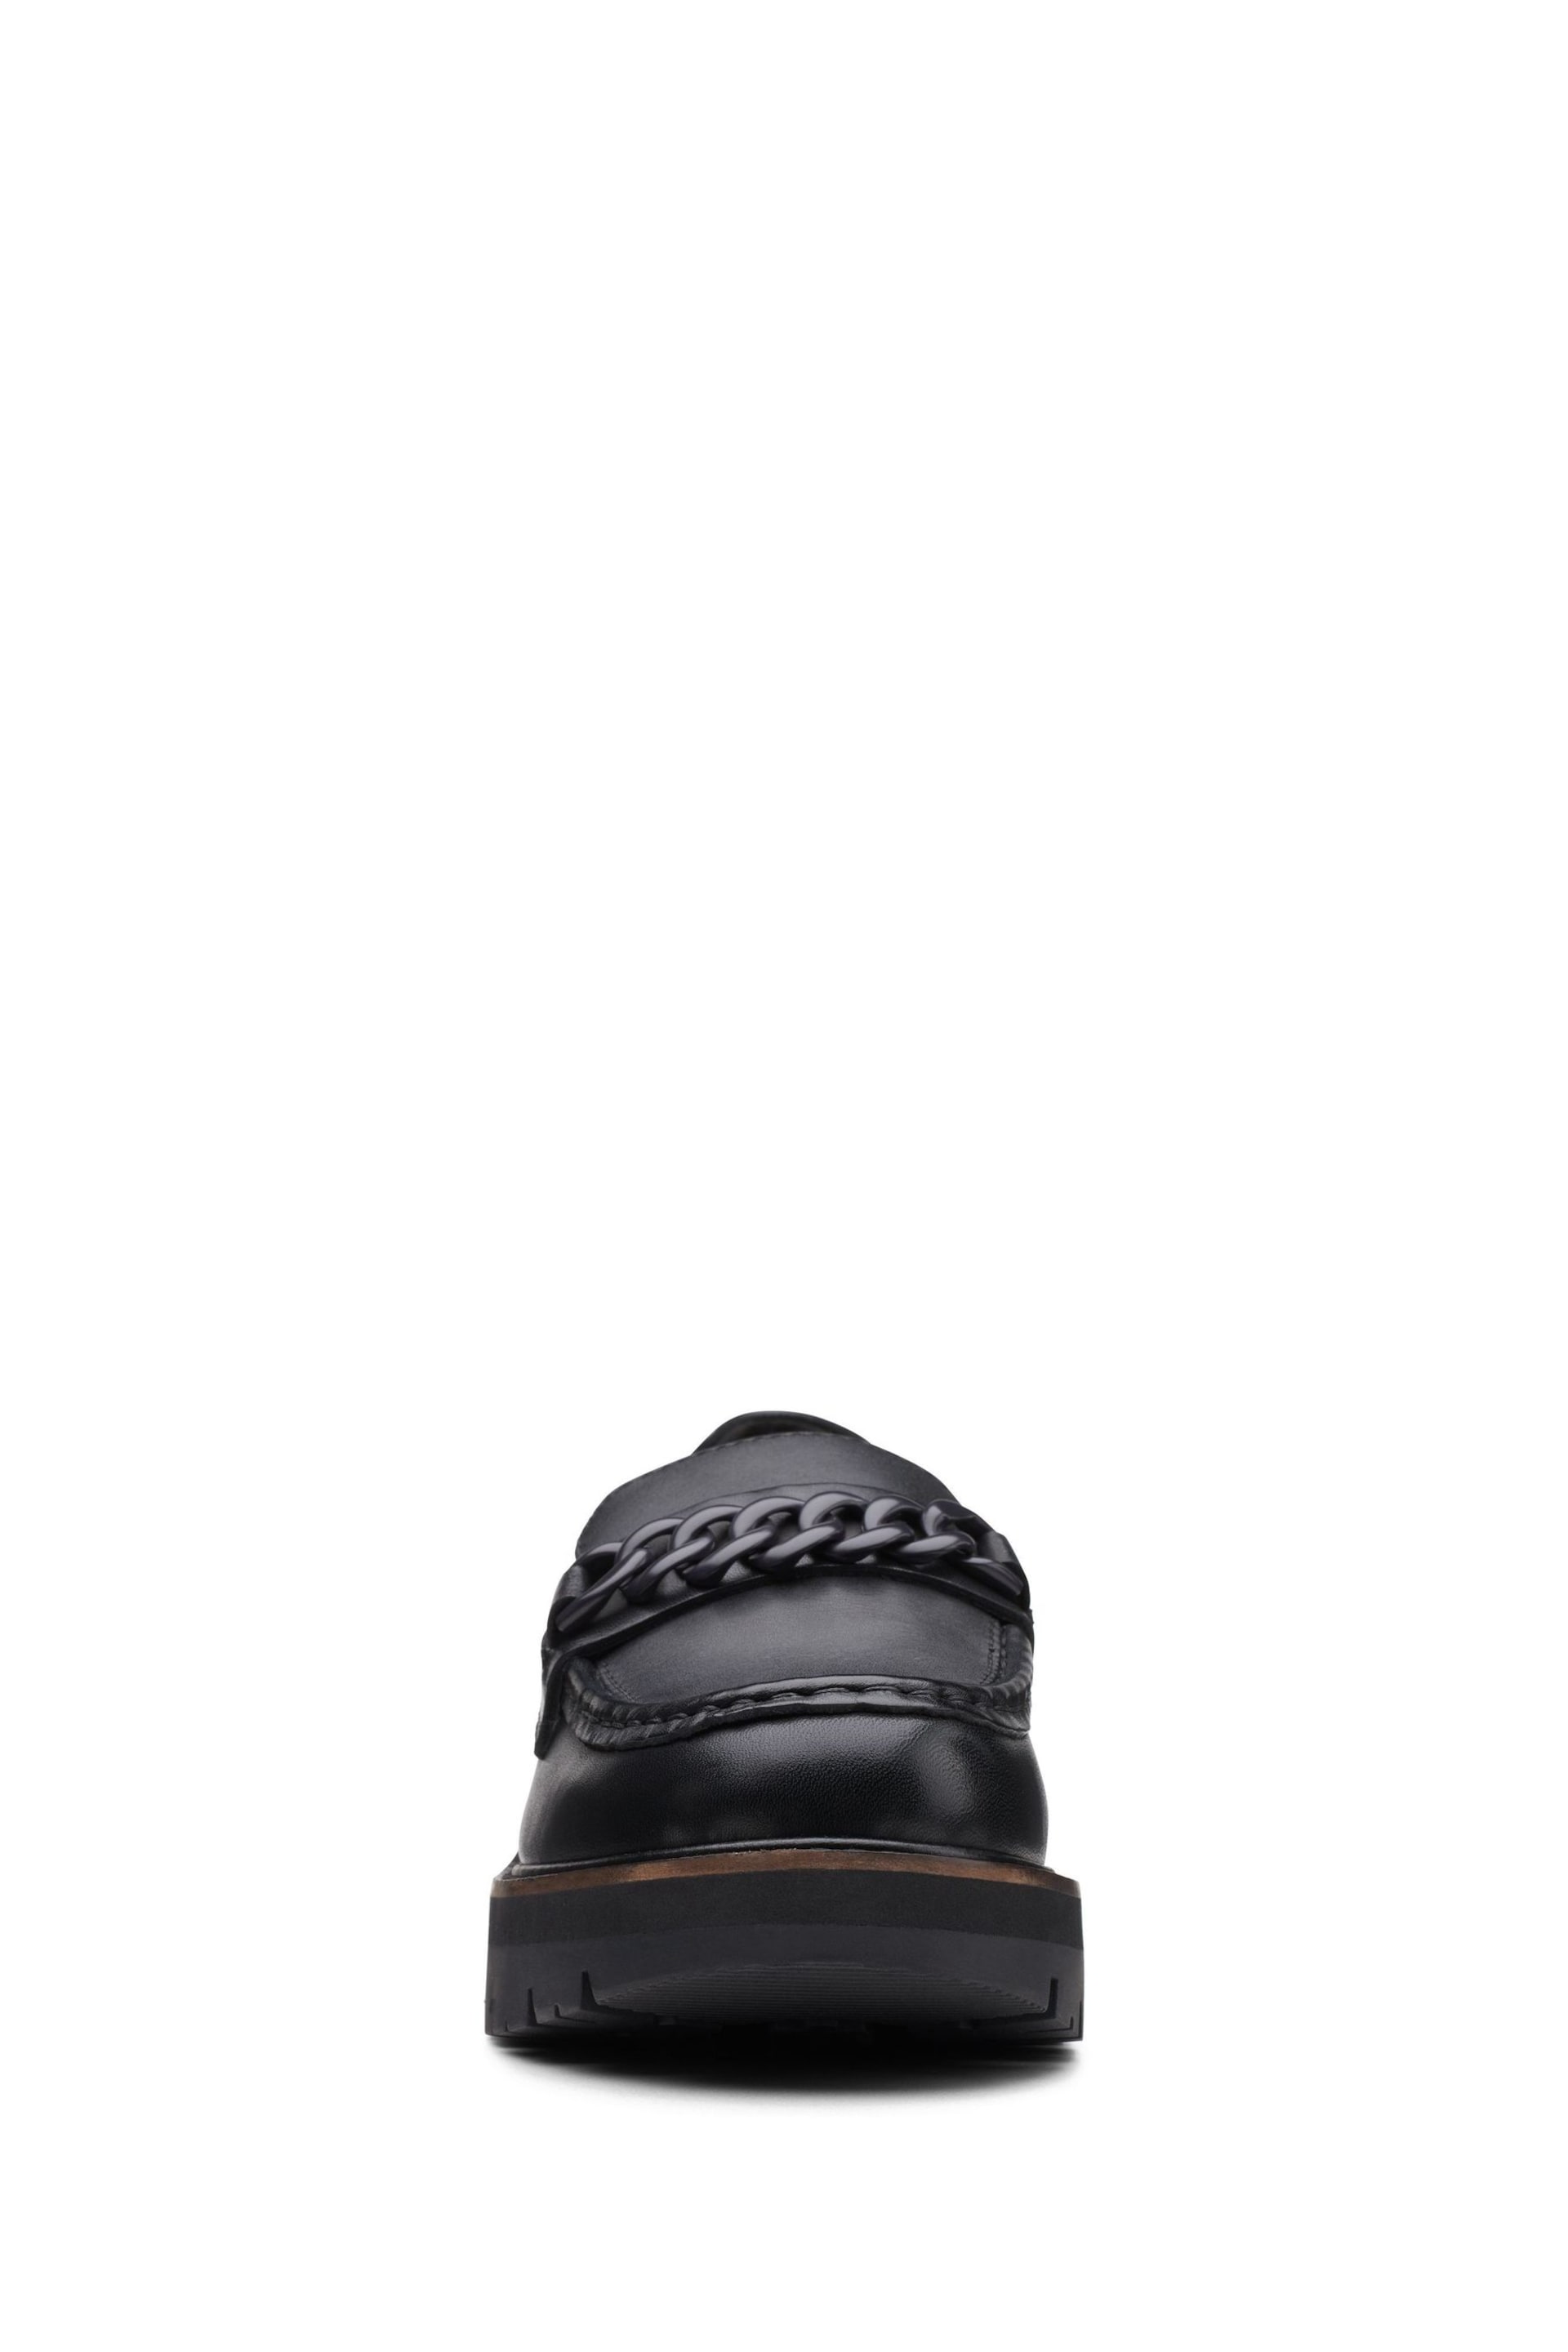 Clarks Black Leather Orianna Edge Loafer Shoes - Image 5 of 7